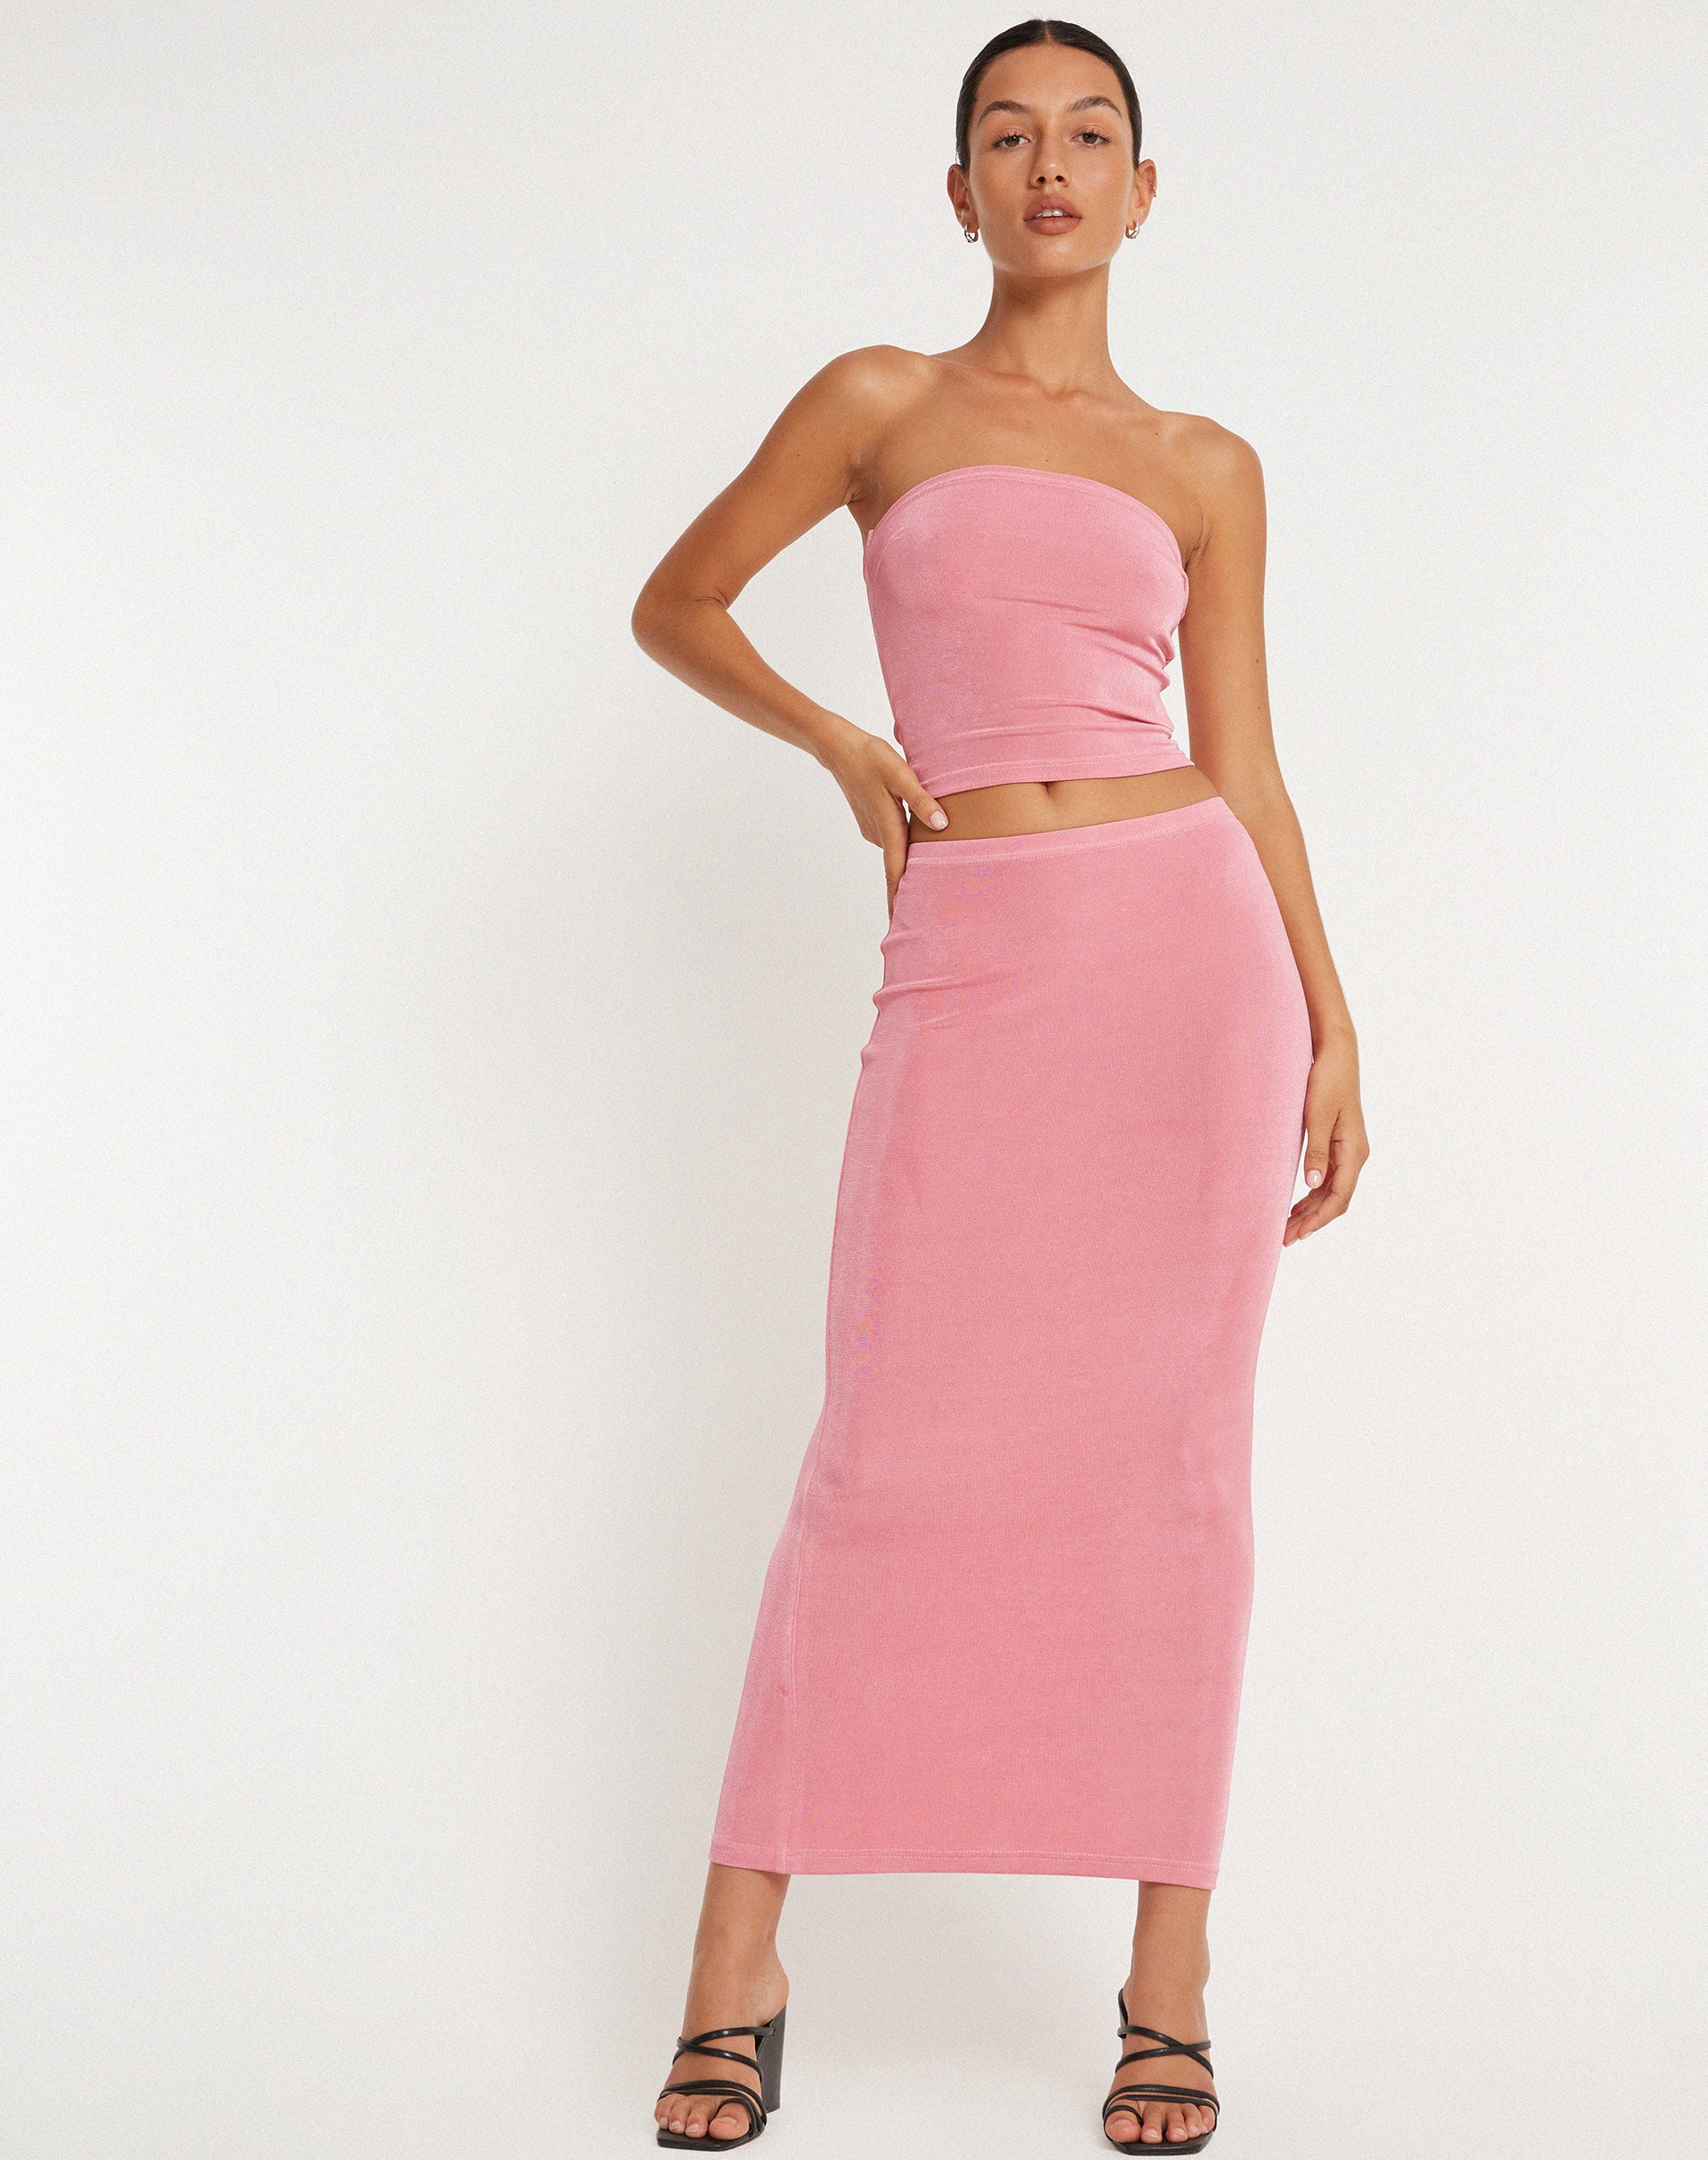 Image of Tulus Maxi Skirt in Pink